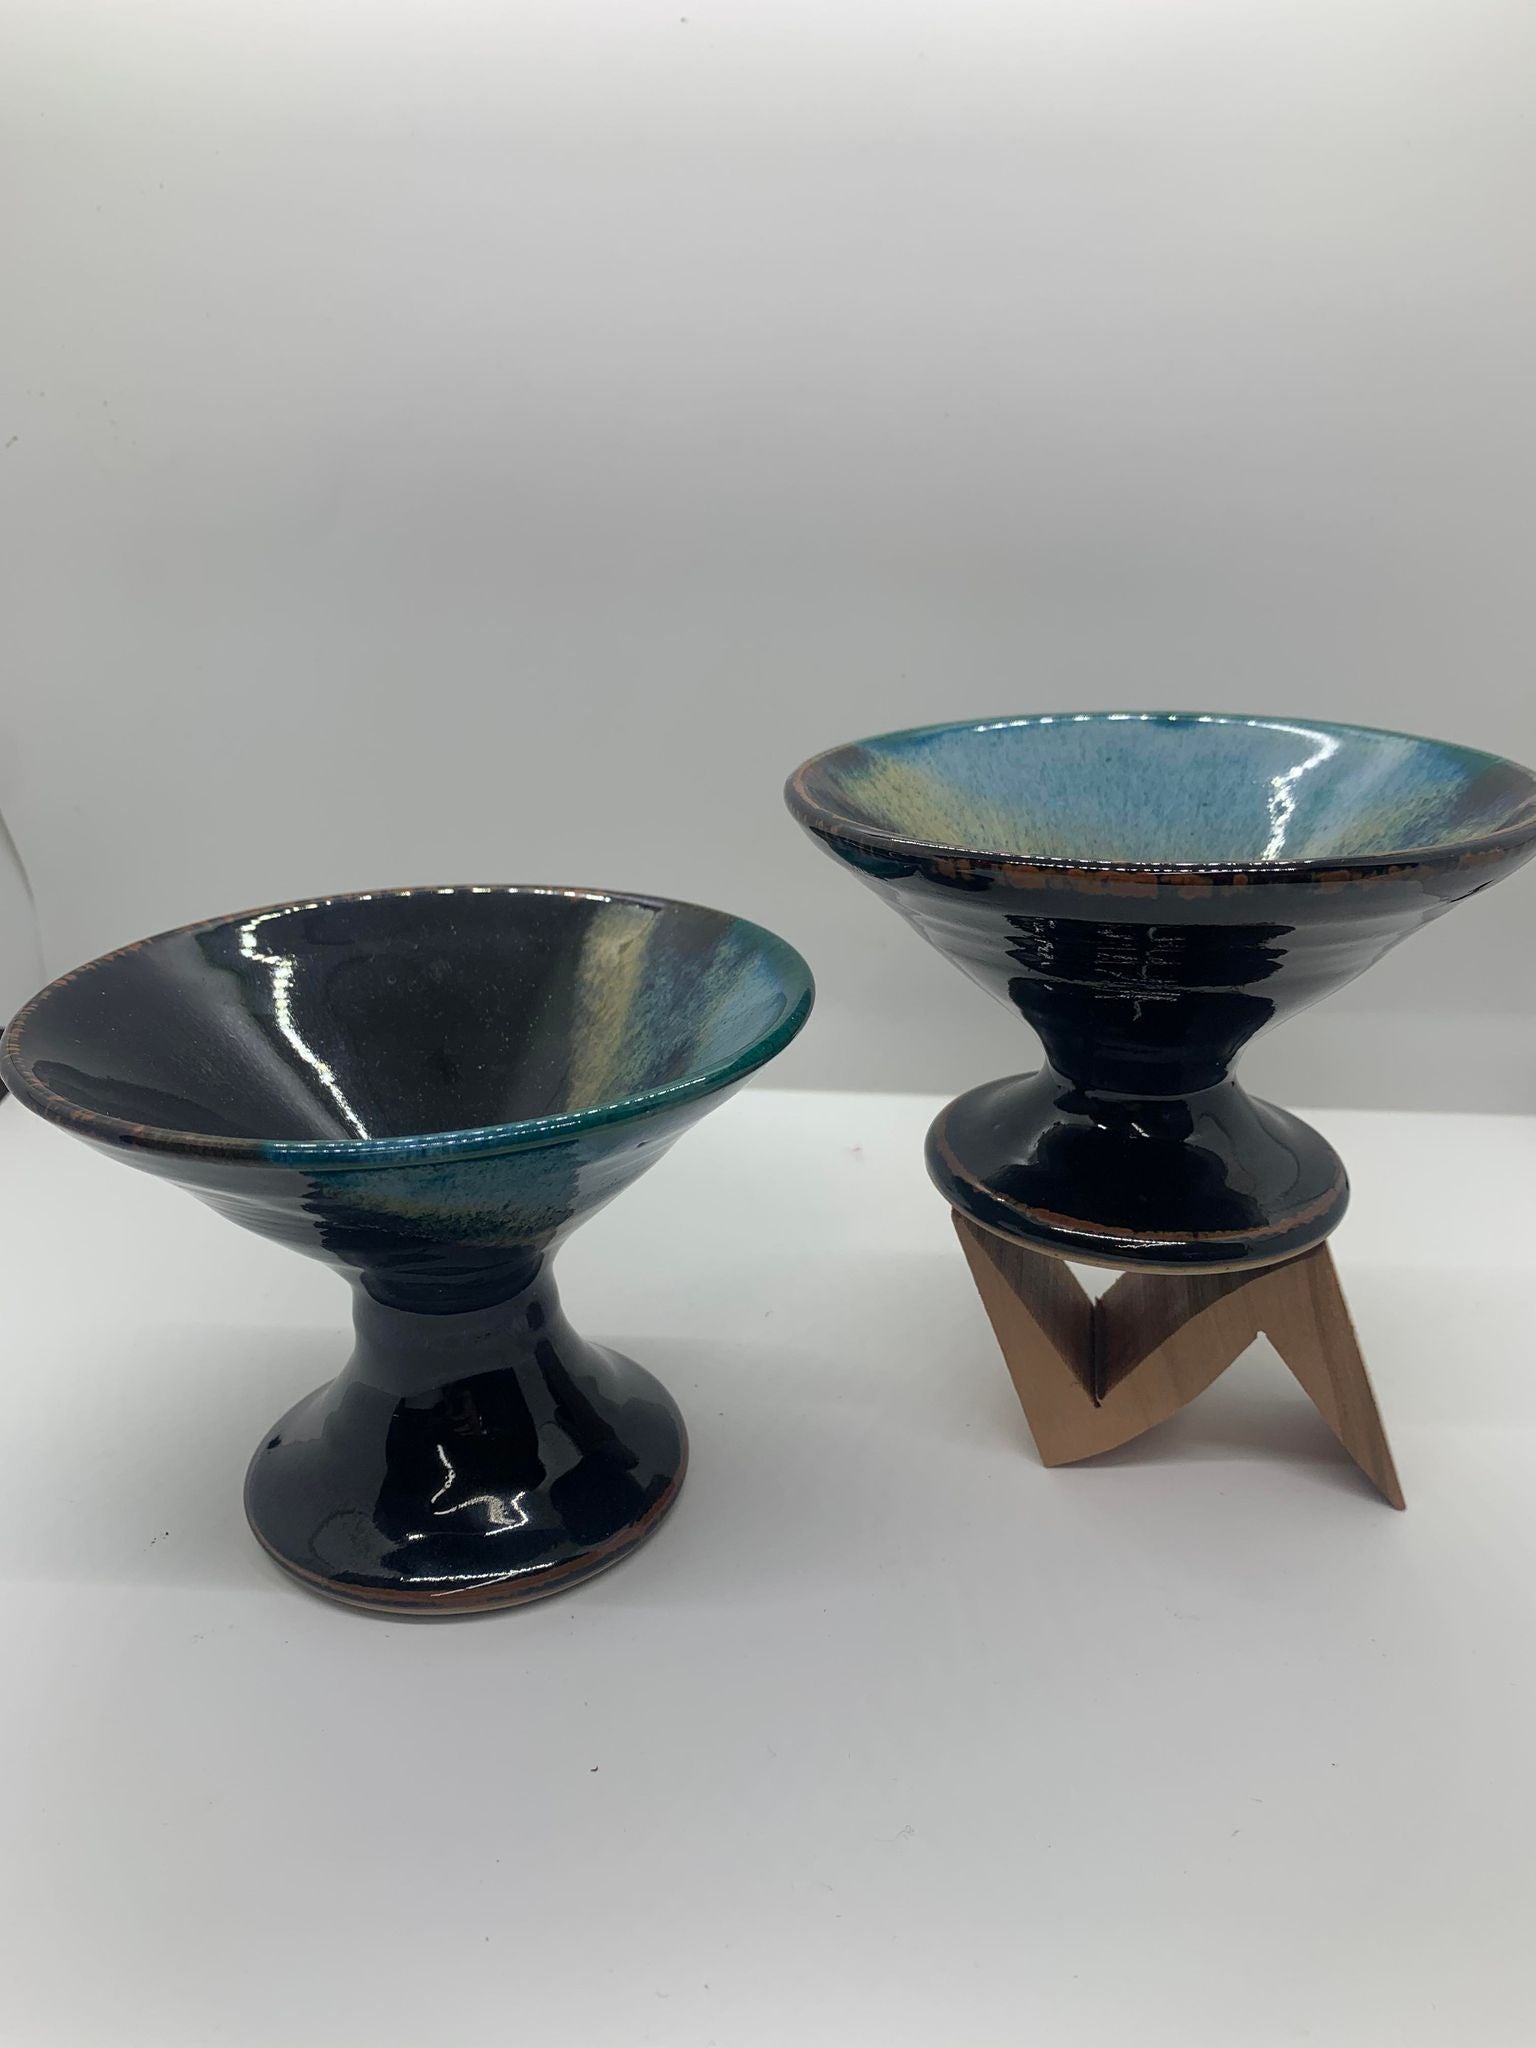 Two Perry Munn Pottery Margarita Glasses on a stand.